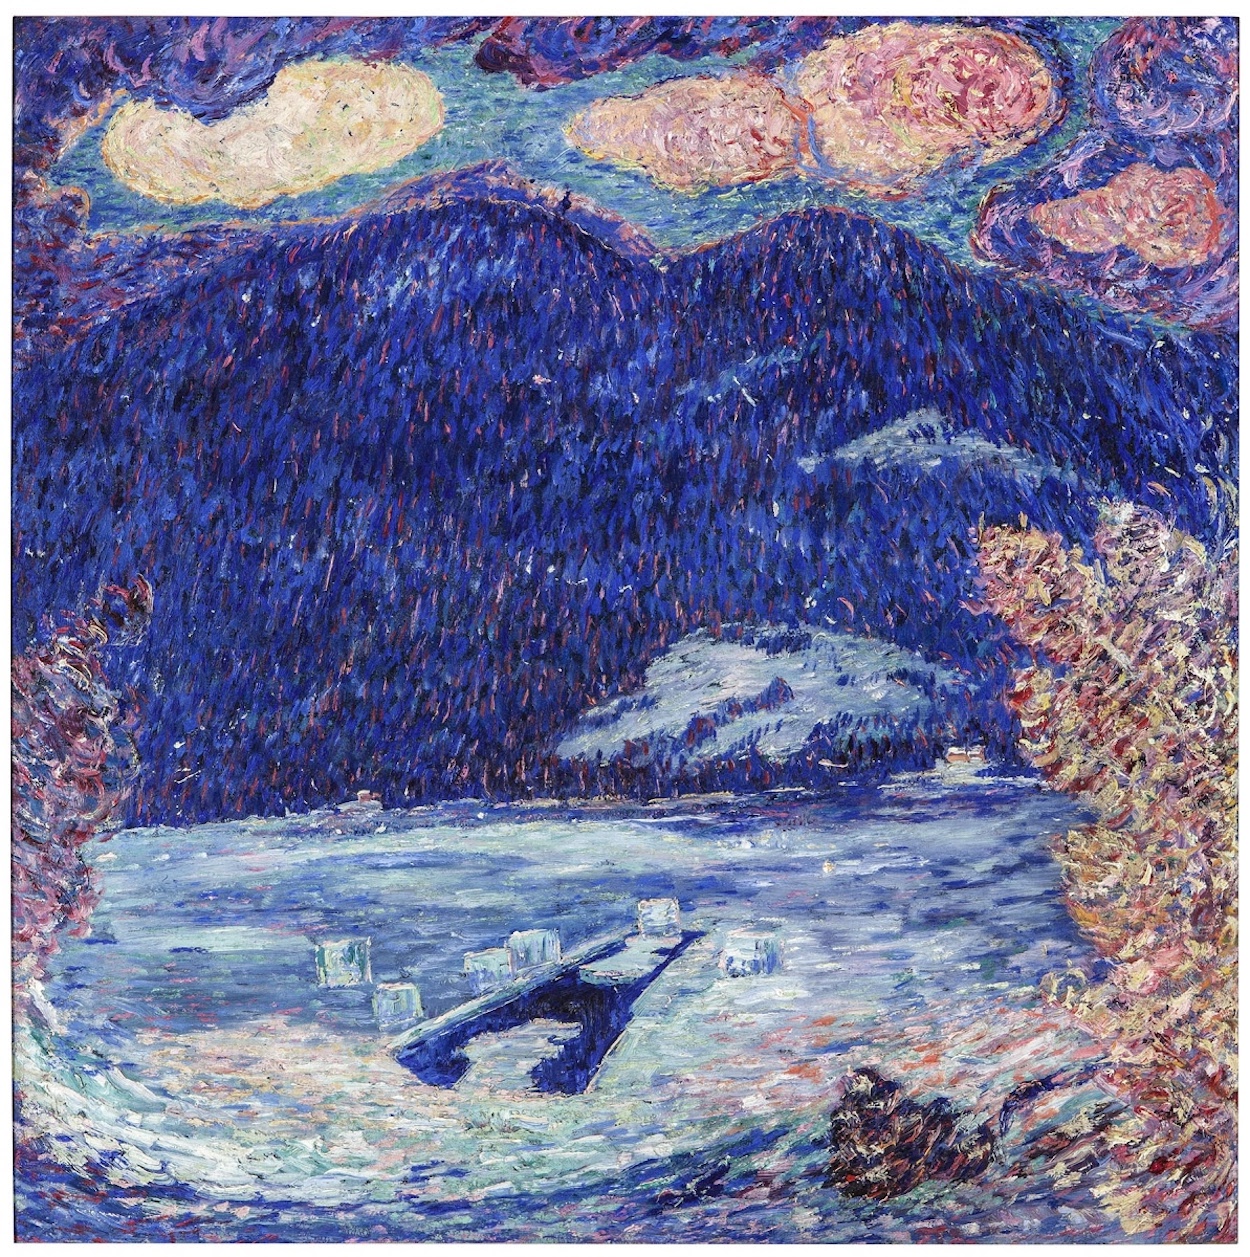 The Ice Hole, Maine by Marsden Hartley - 1908 - 86.4 × 86.4 cm New Orleans Museum of Art